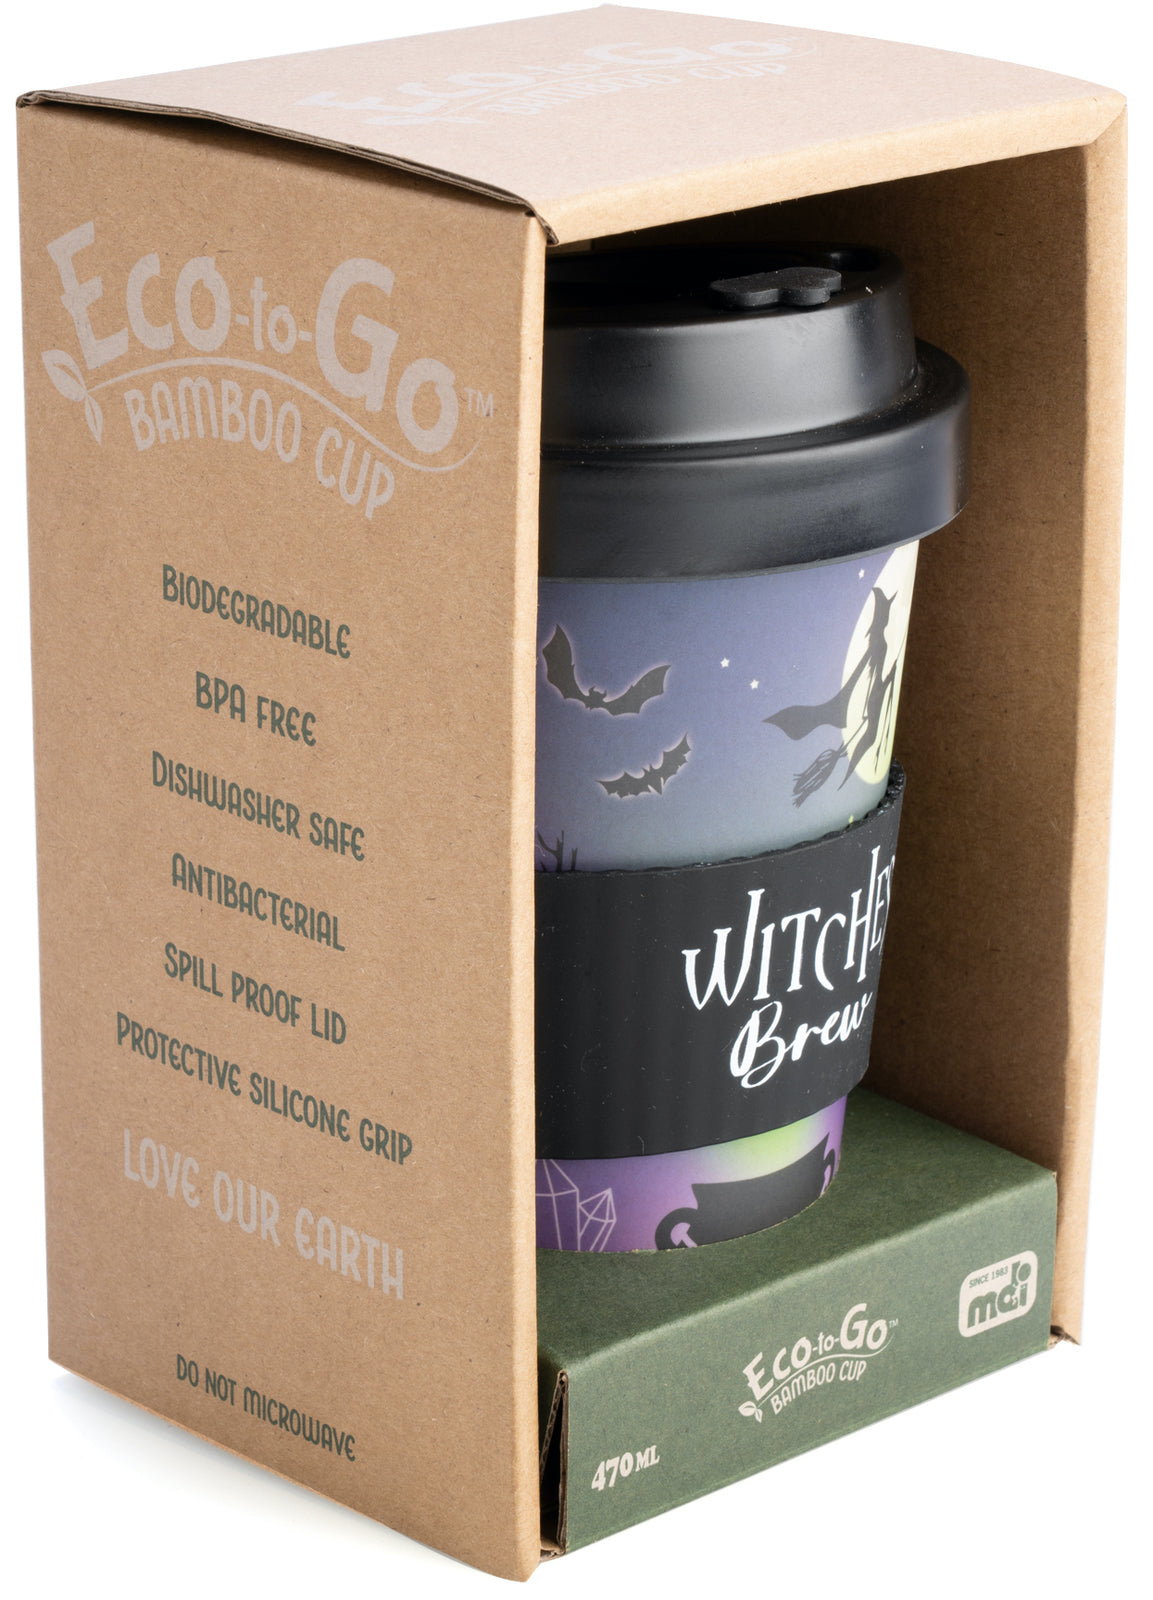 Eco-to-Go Bamboo Cup -Witches’ Brew